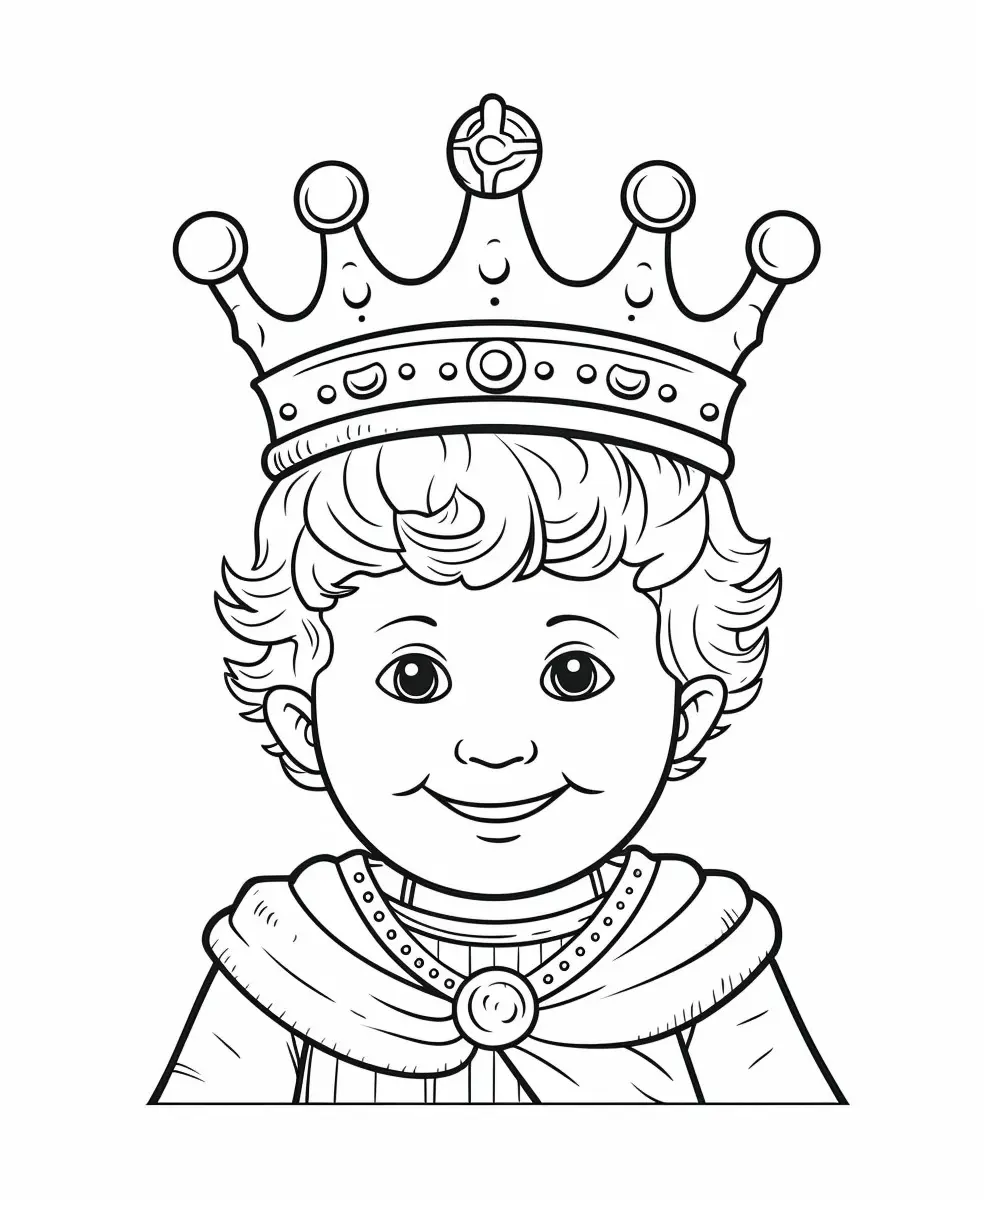 King's Day Celebrations - Coloring Pages Child